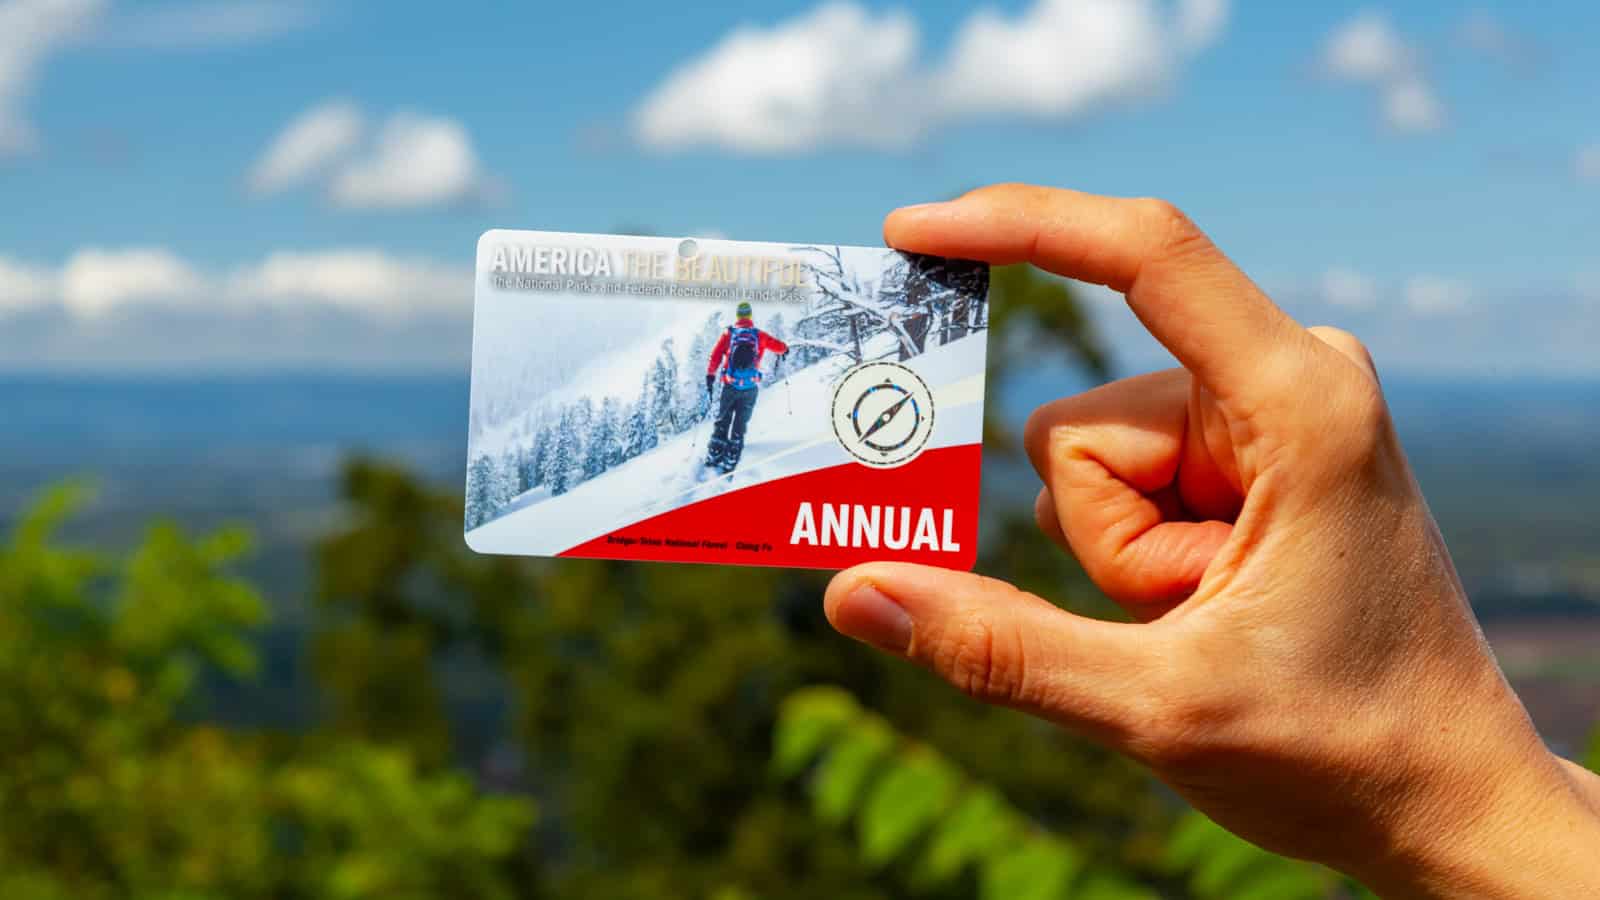 A woman is holding an 'America the beautiful' annual pass card against vista of Shenandoah